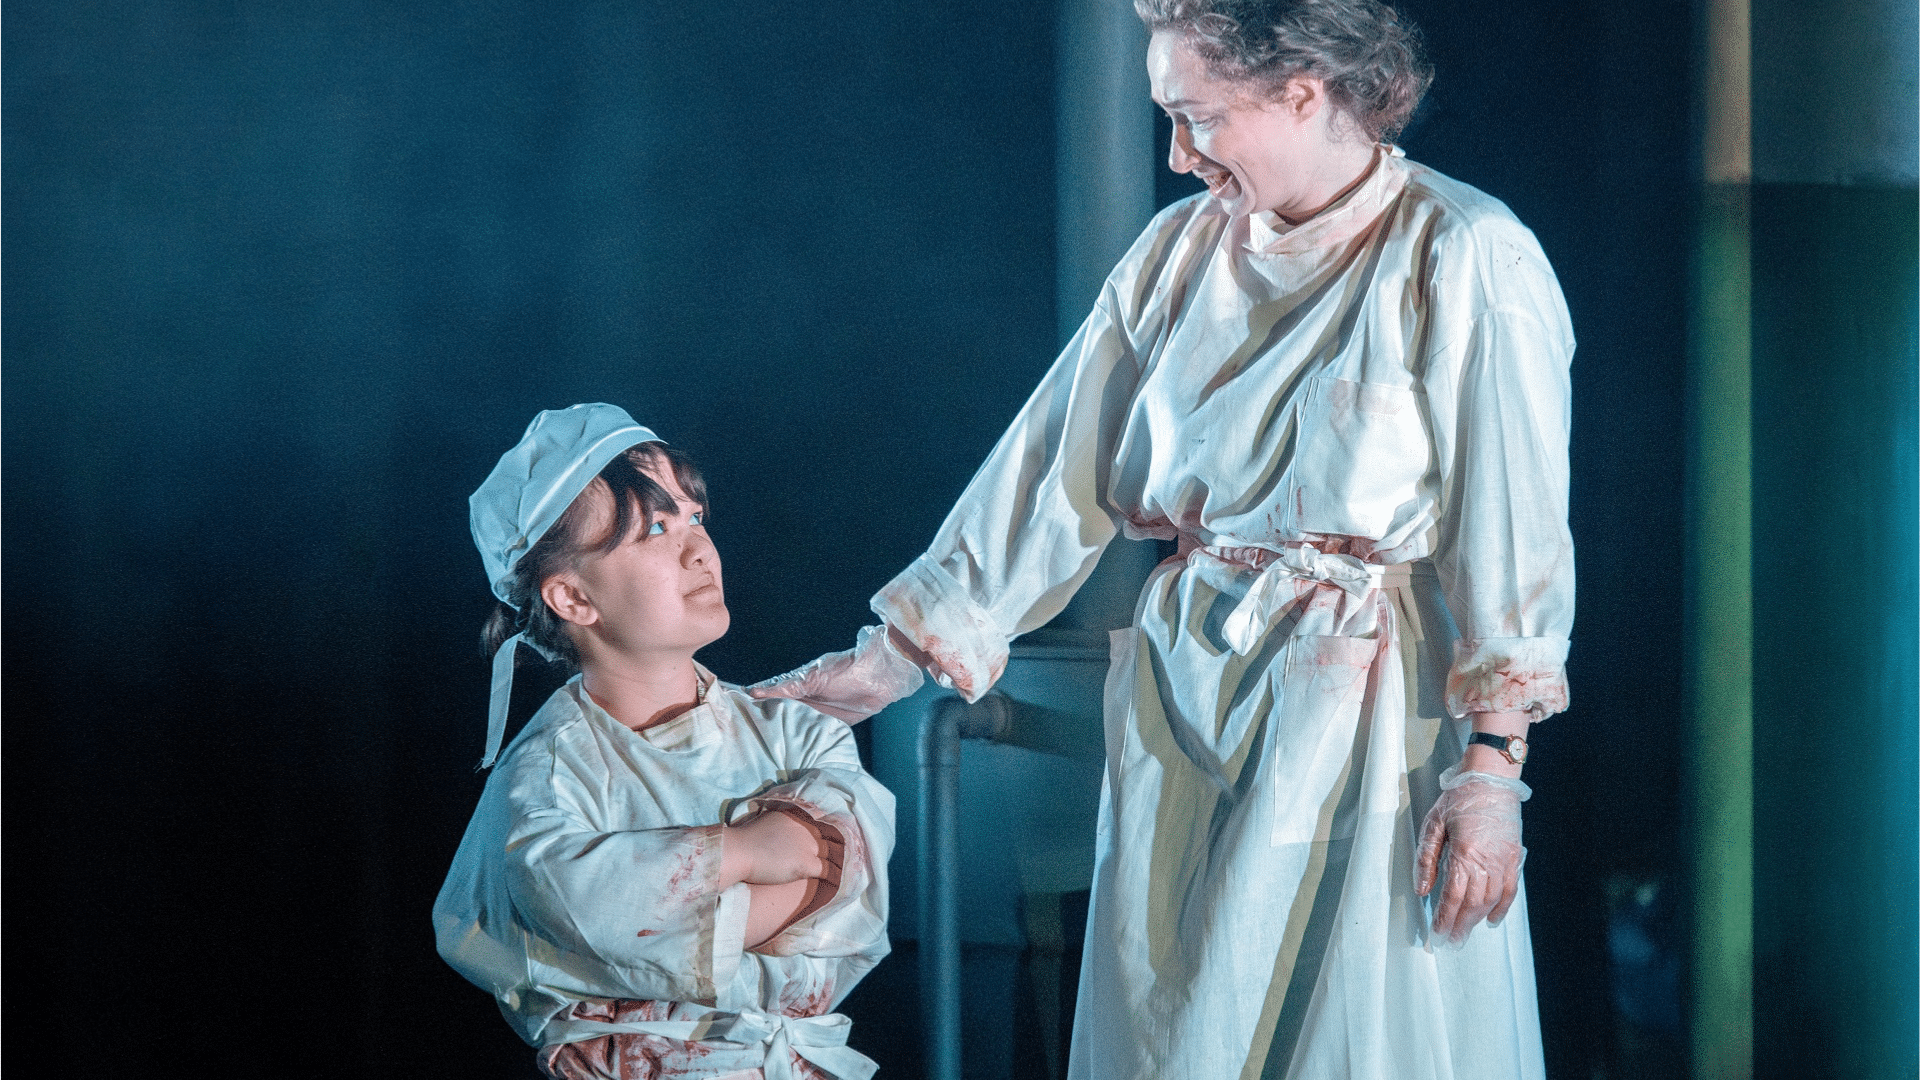 Frankenstein production photo: Annette Hannah and Eleanor McLaughlin (playing Victoria Frankenstein) are both dressed in white surgical scrubs, with small blood splatters. Hannah (left) is crossing her arms and looking up at McLaughlin, who smiles and grasps her shoulder.